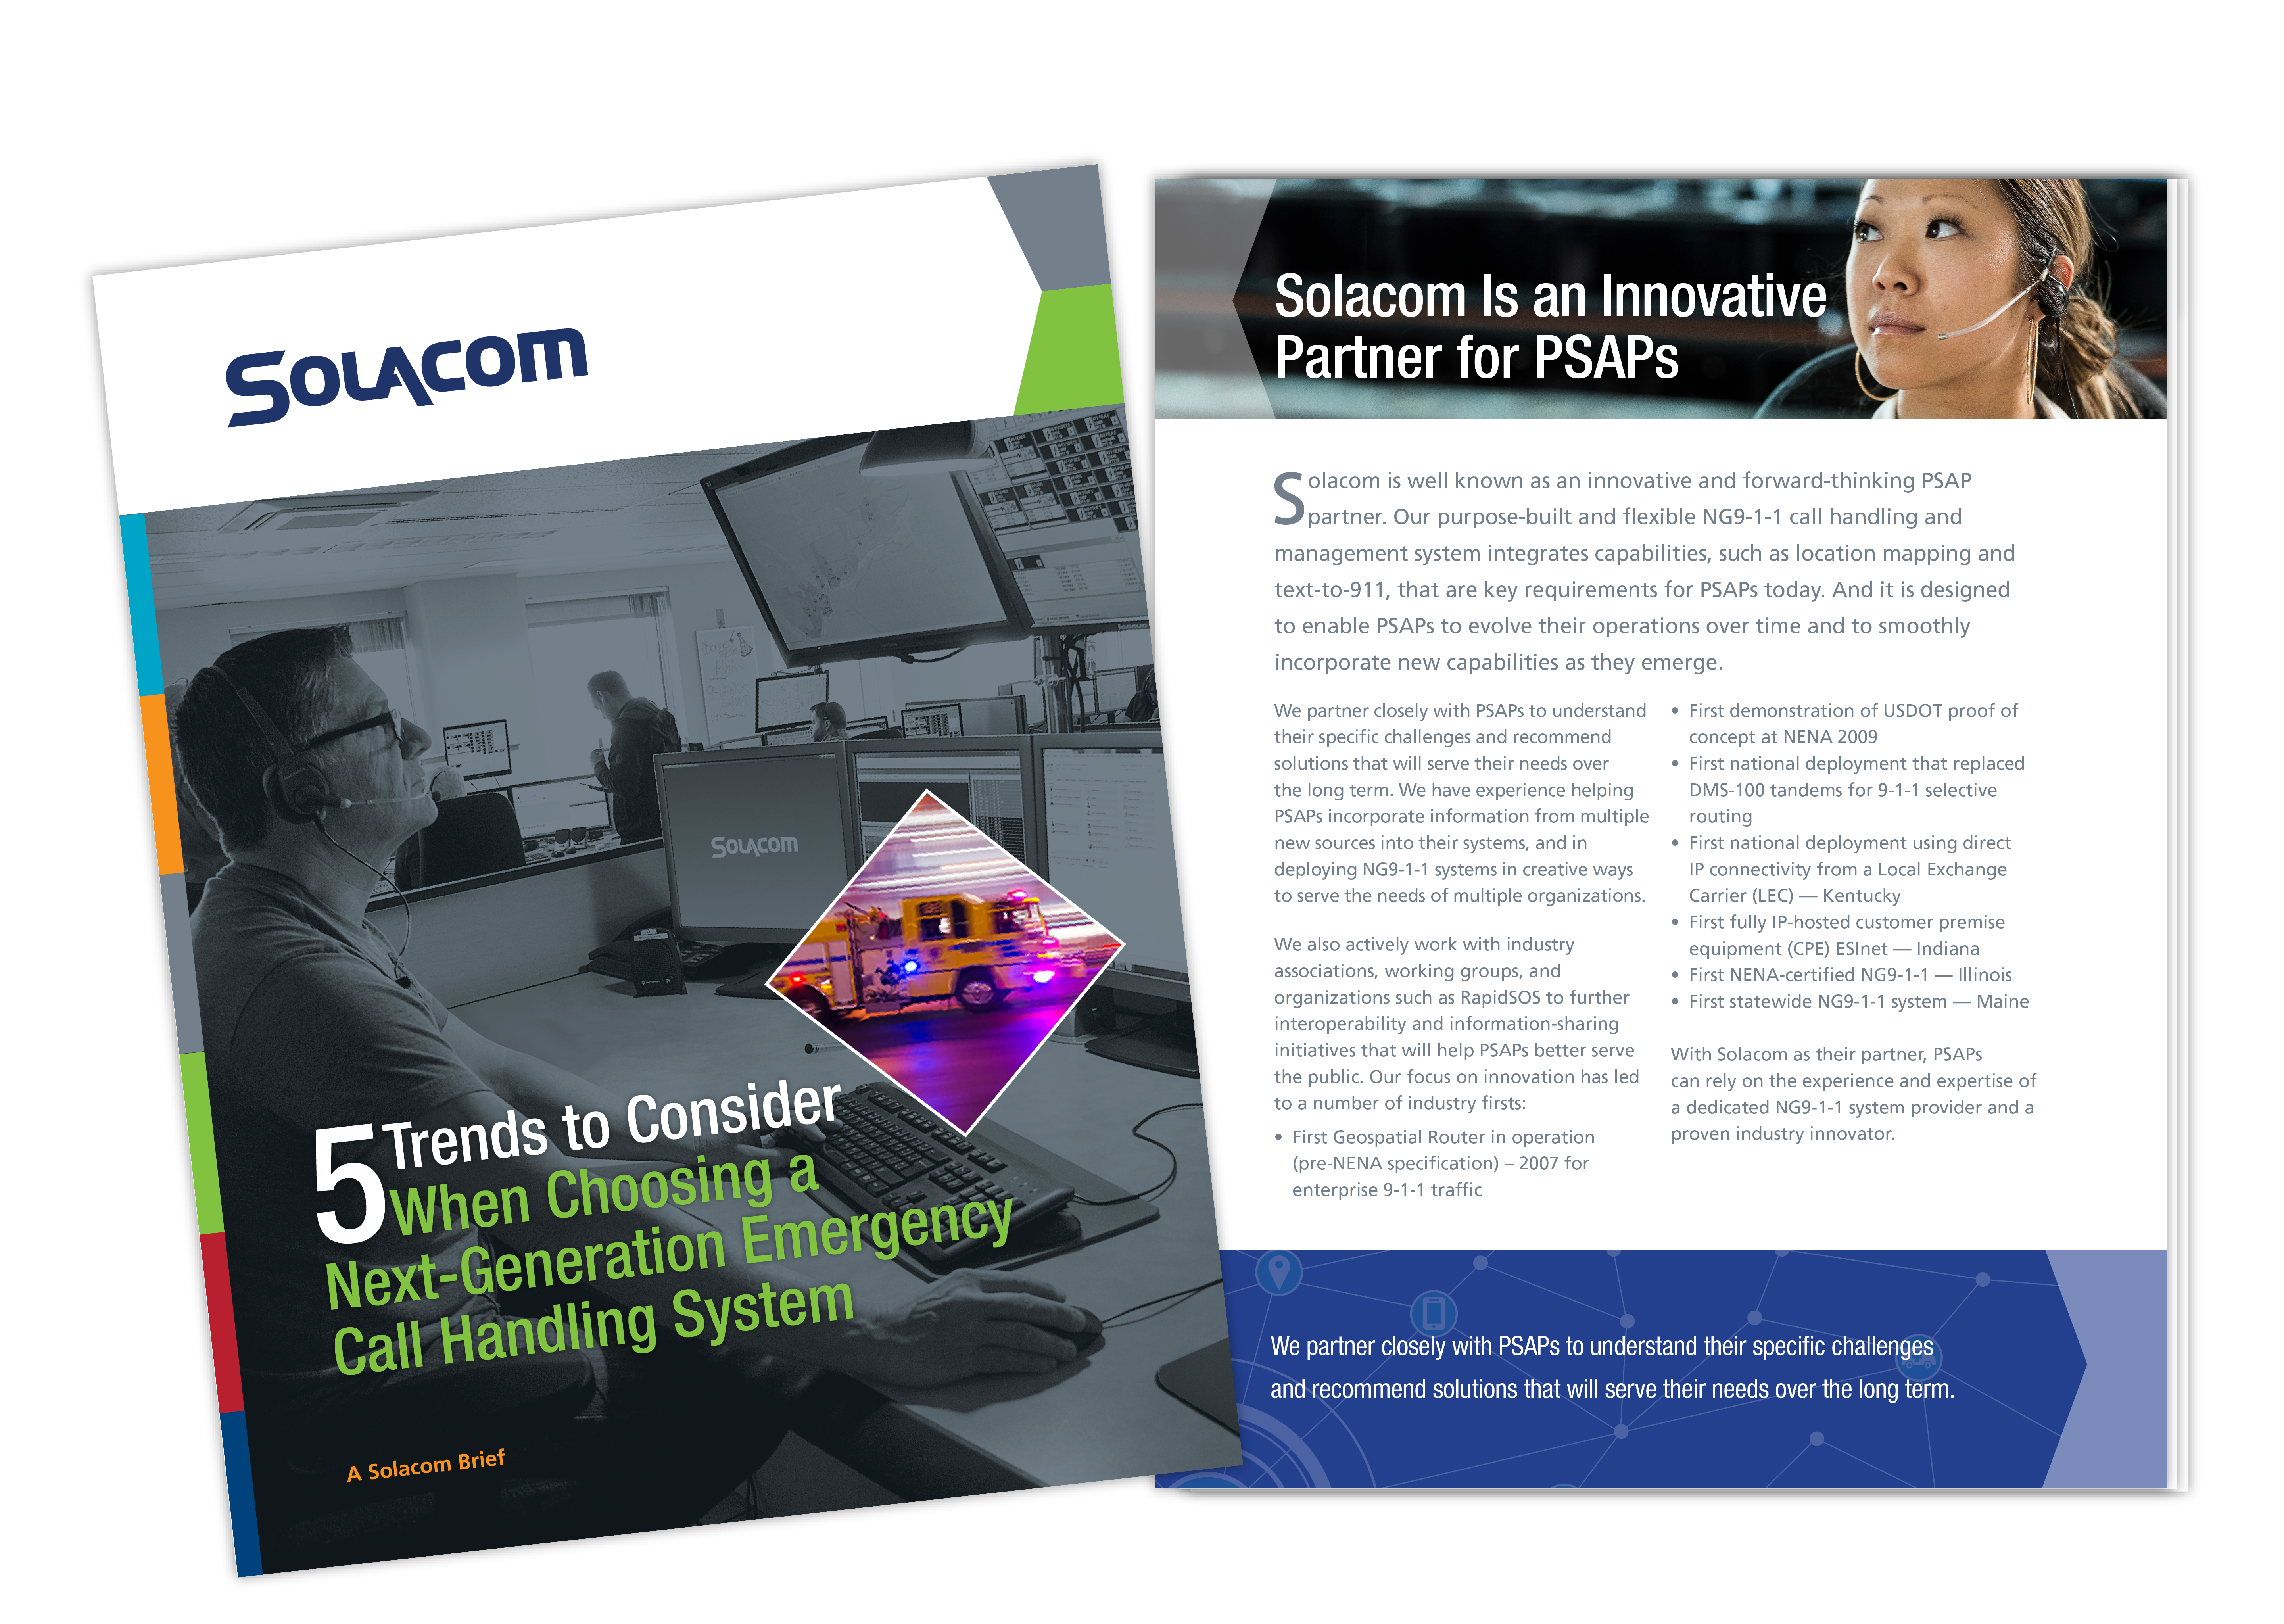 Five Trends to Consider When Choosing a Next-Generation Emergency Call Handling System, a Solacom brief